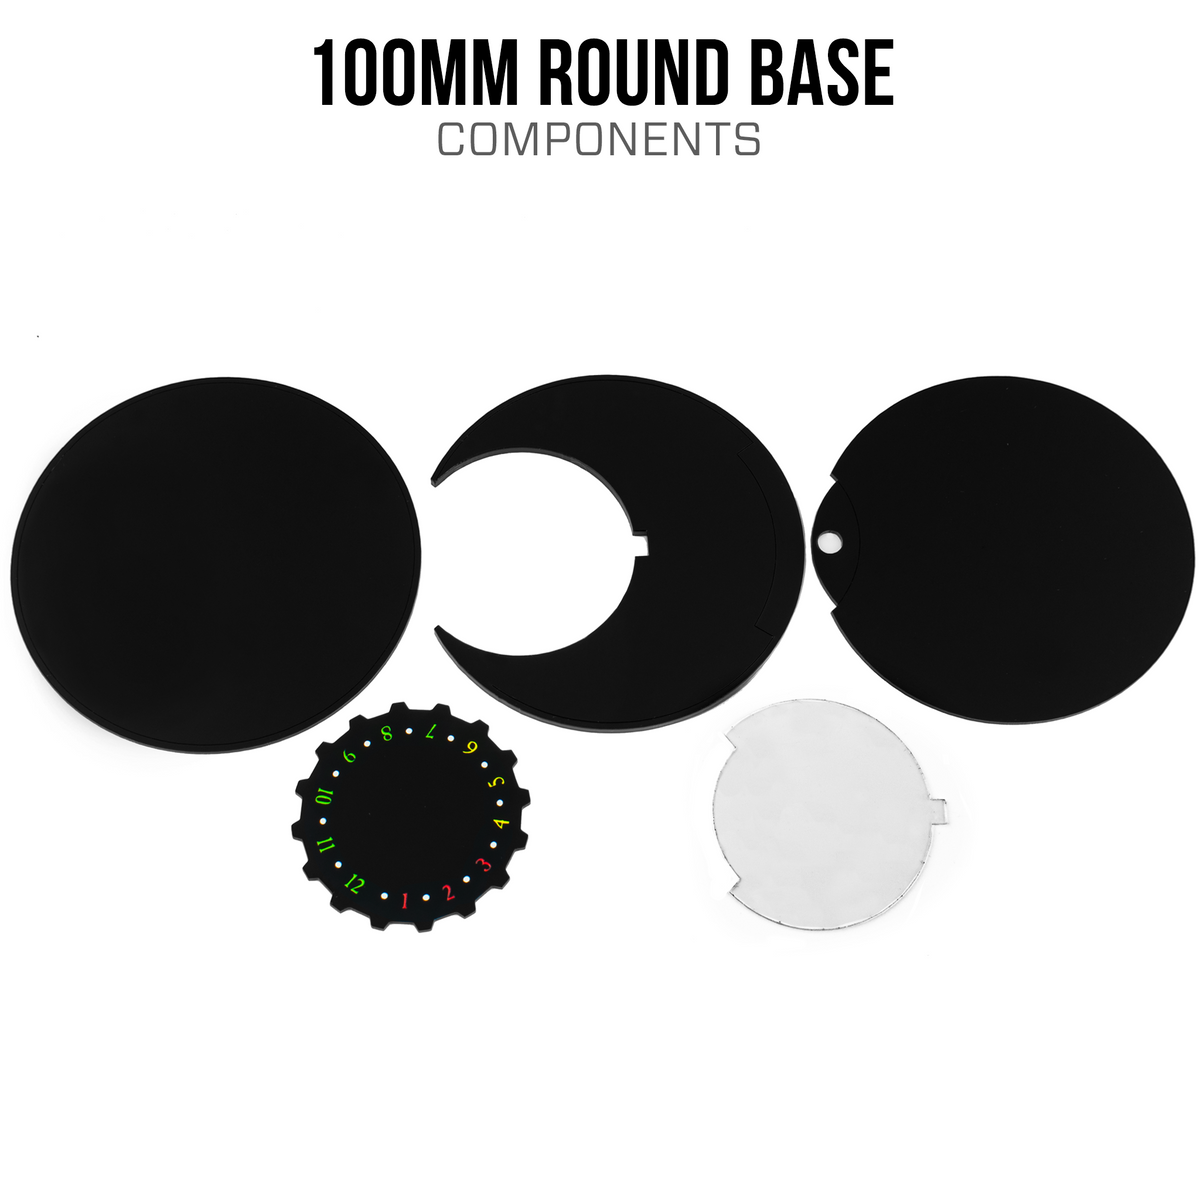 100mm Round Base with Wound Tracker